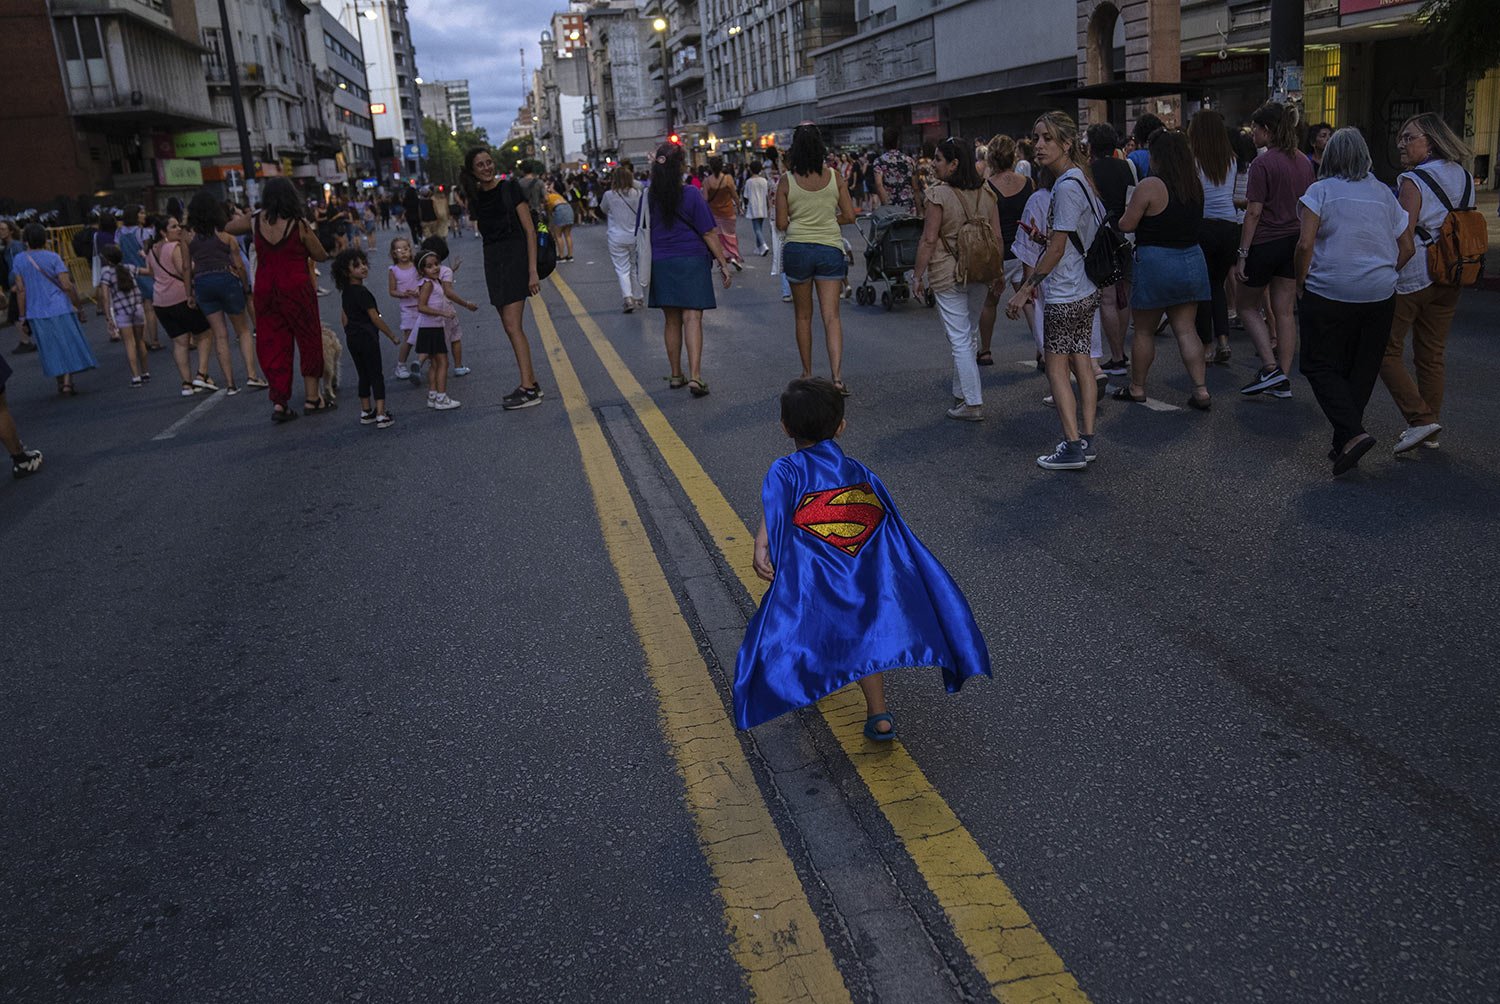  A boy in a Superman cape runs during a rally to mark International Women's Day in Montevideo, Uruguay, Wednesday, March 8, 2023. (AP Photo/Matilde Campodonico) 